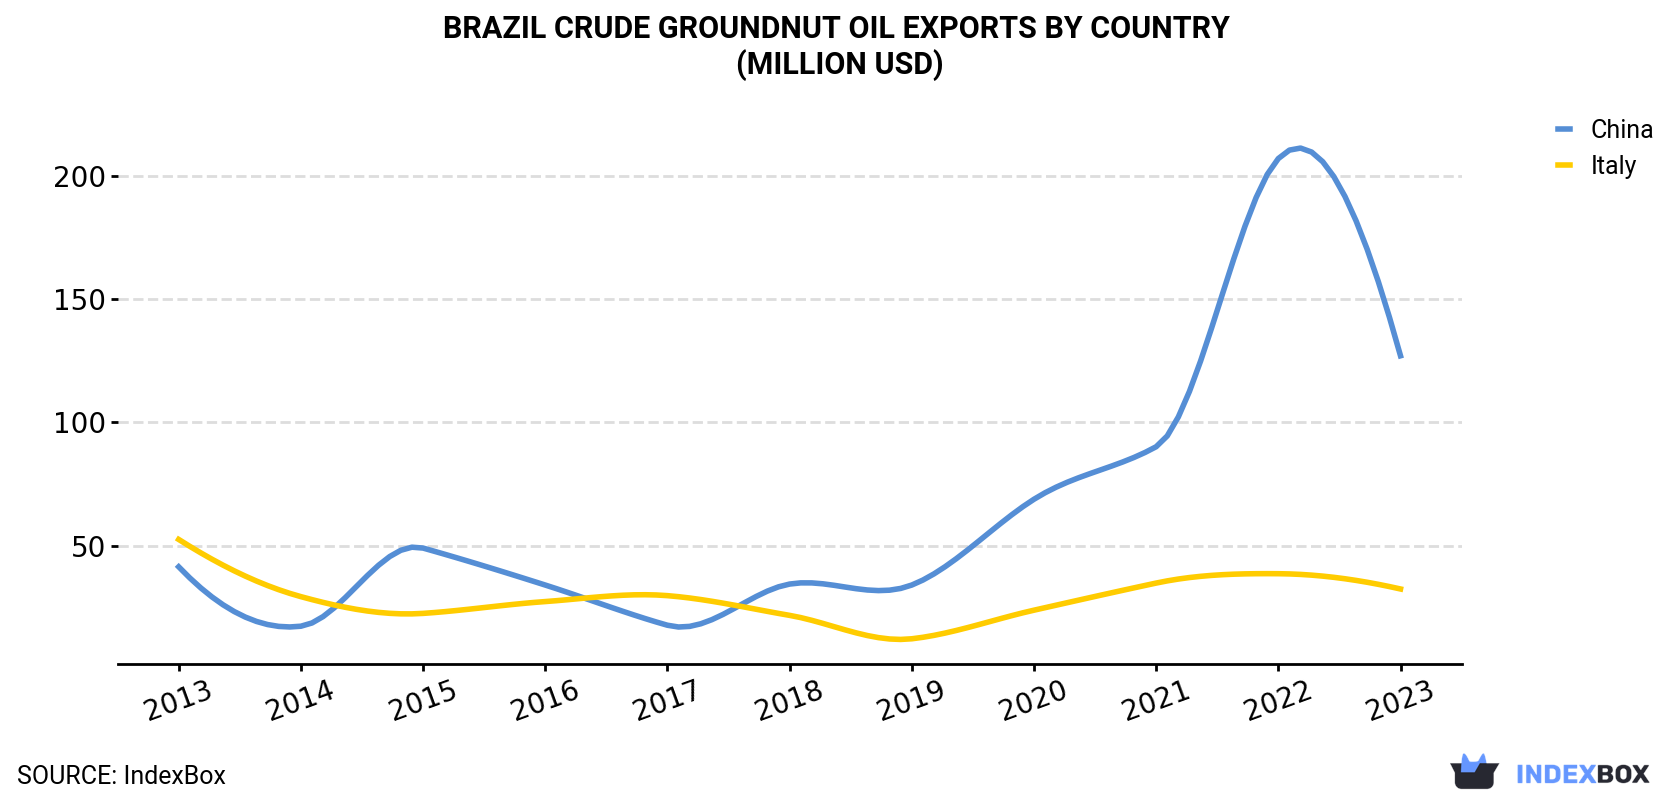 Brazil Crude Groundnut Oil Exports By Country (Million USD)